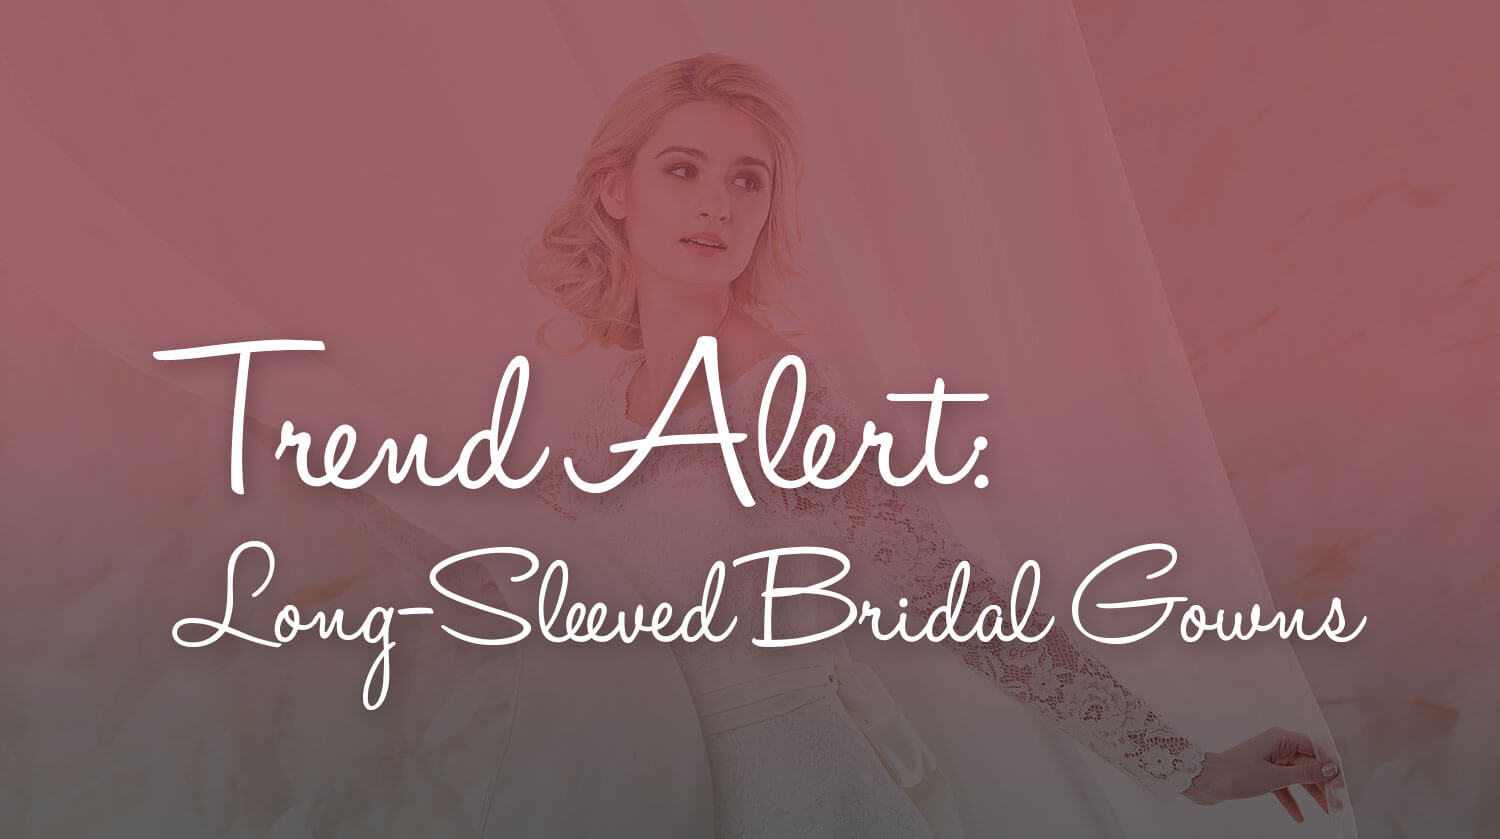 Trend Alert: Long-Sleeved Bridal Gowns